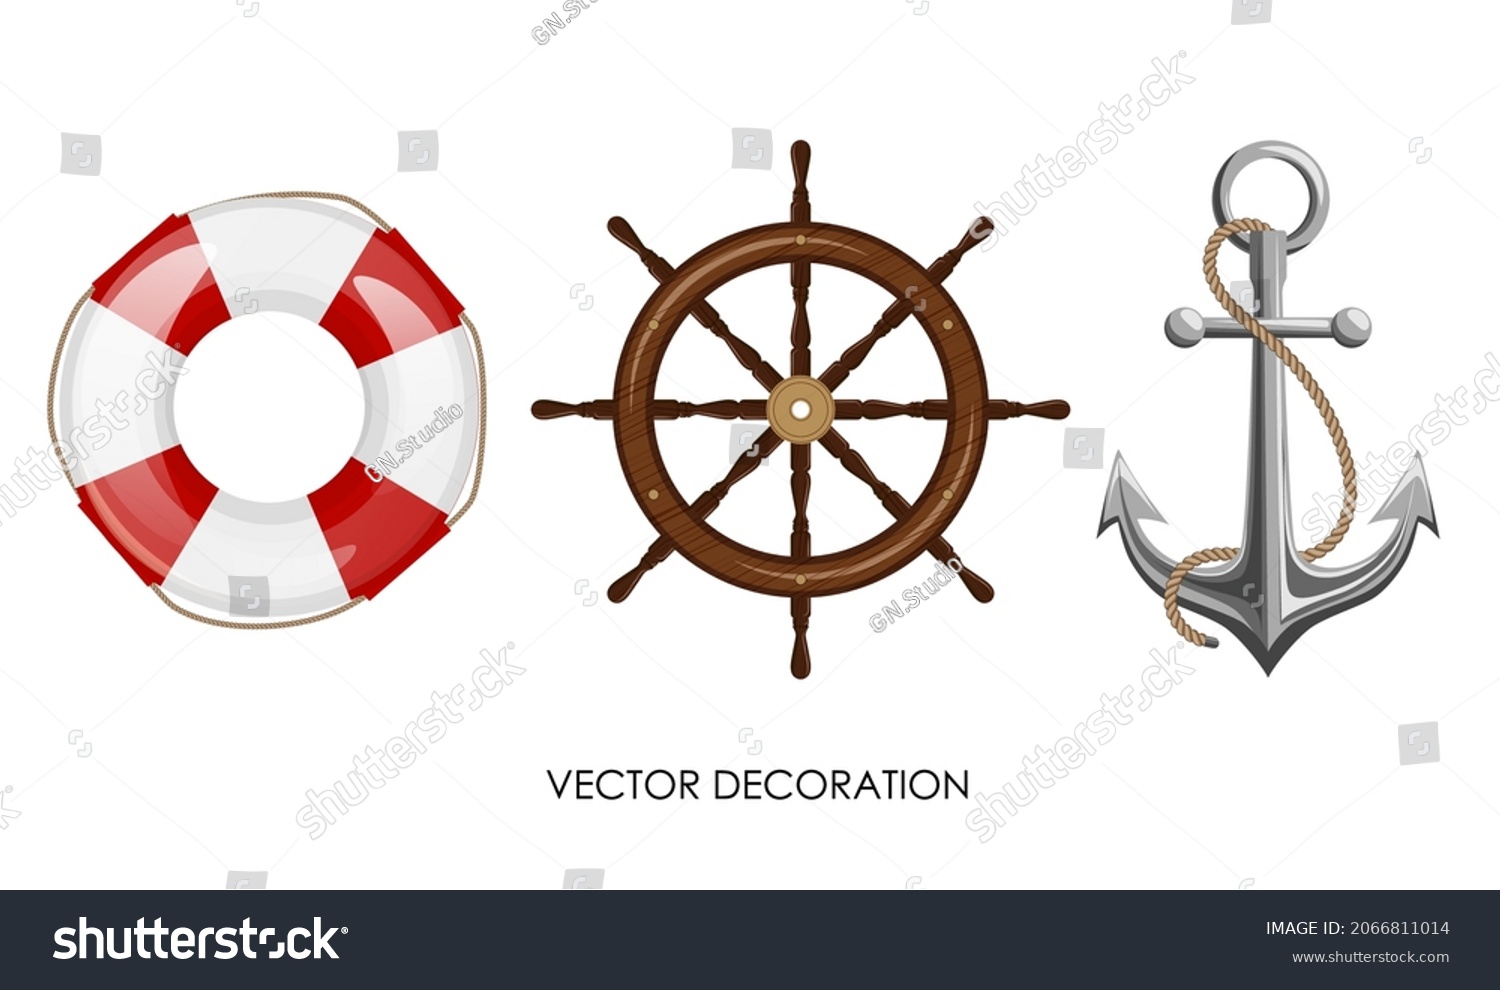 Set of lifebuoy, wooden steering wheel, anchor with rope on white background. Isolated vintage ship objects. Elements of sea boat equipment . Marine theme decoration. Vector illustration #2066811014